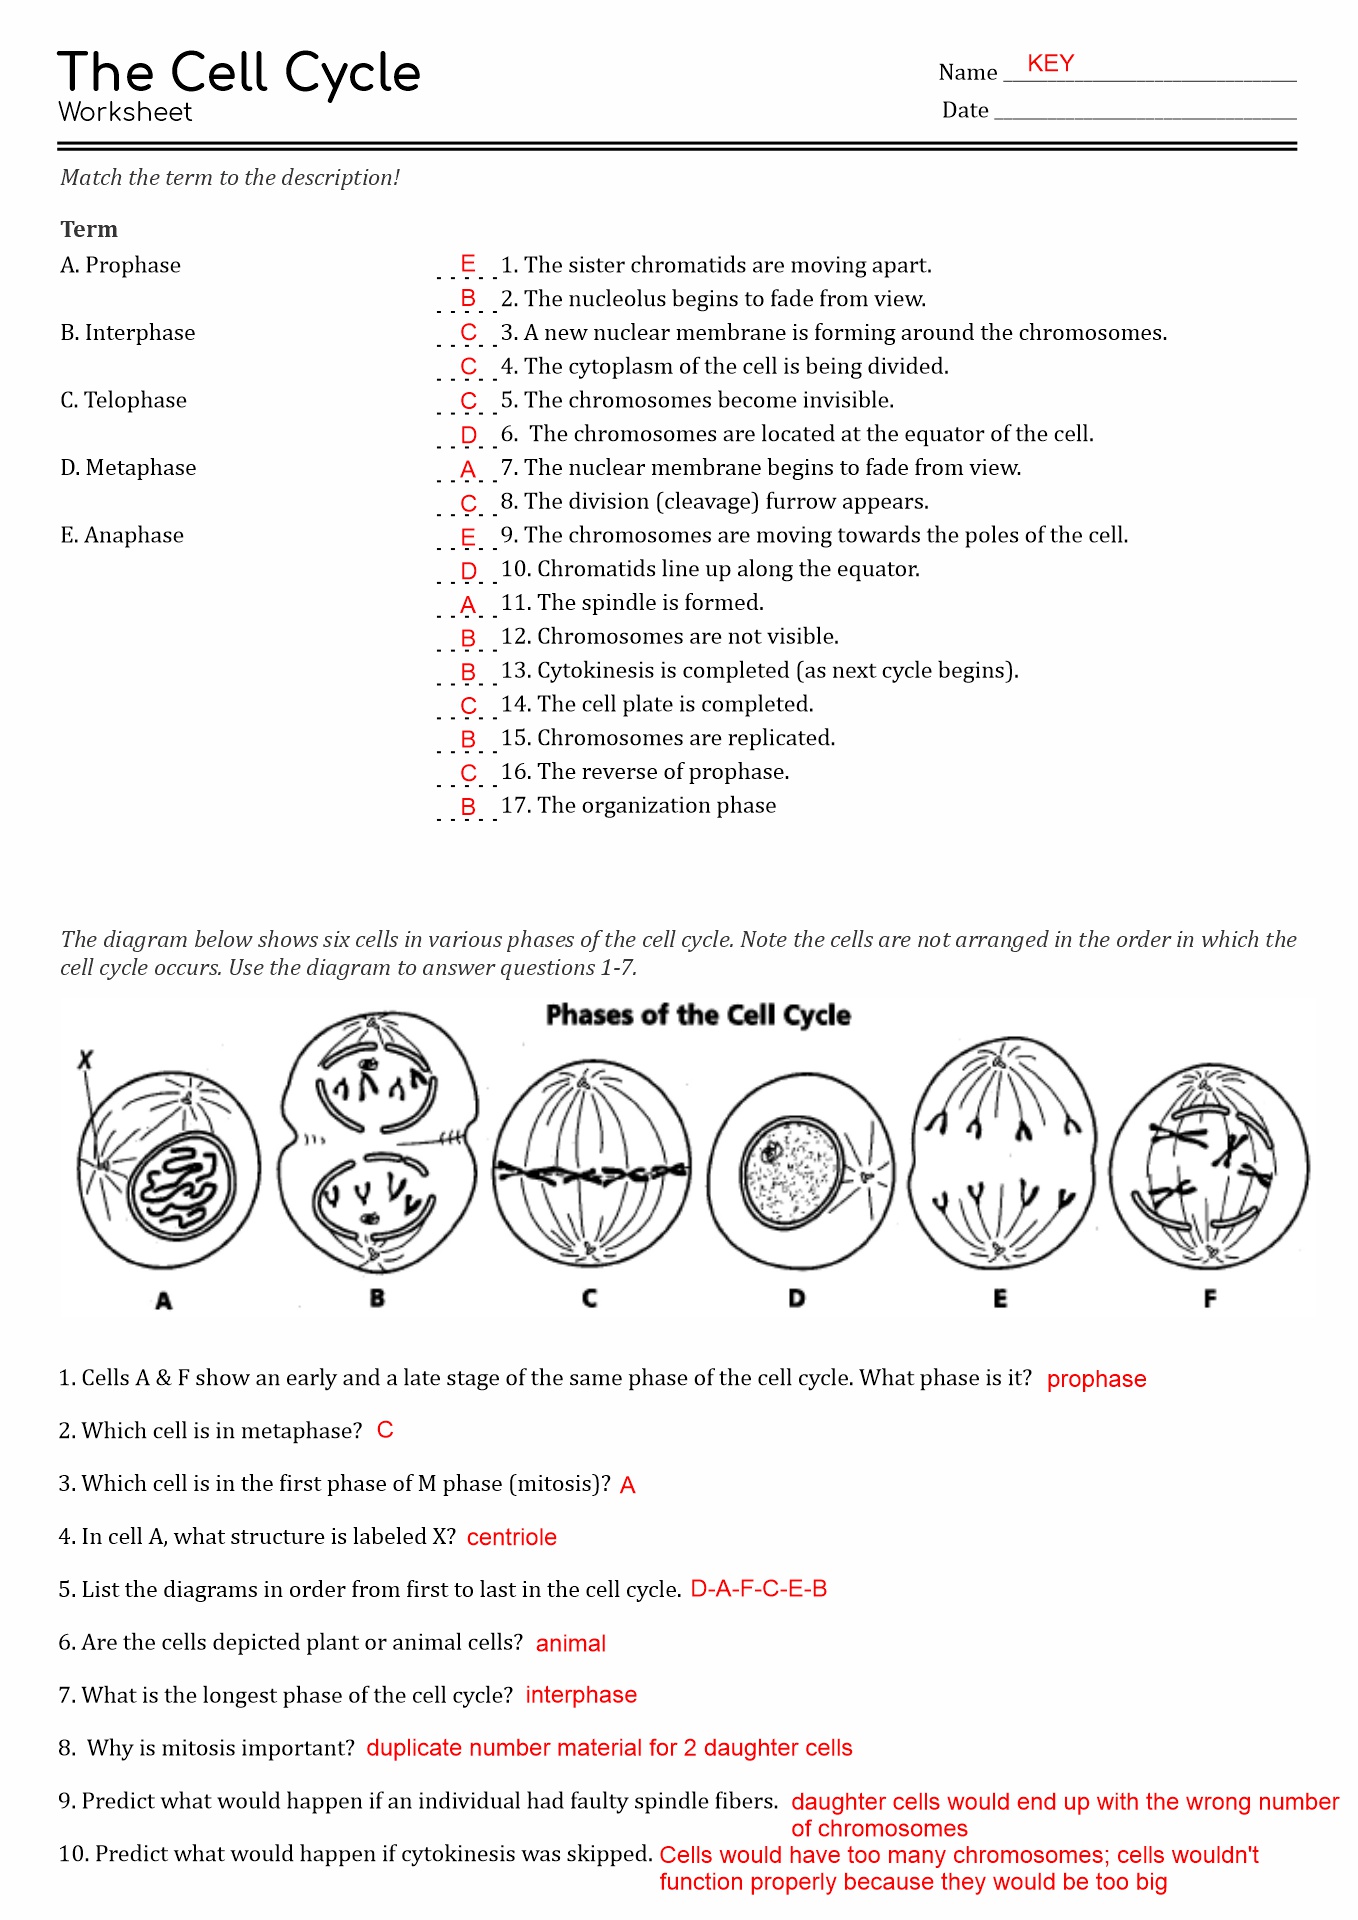 cell-cycle-worksheet-answer-key